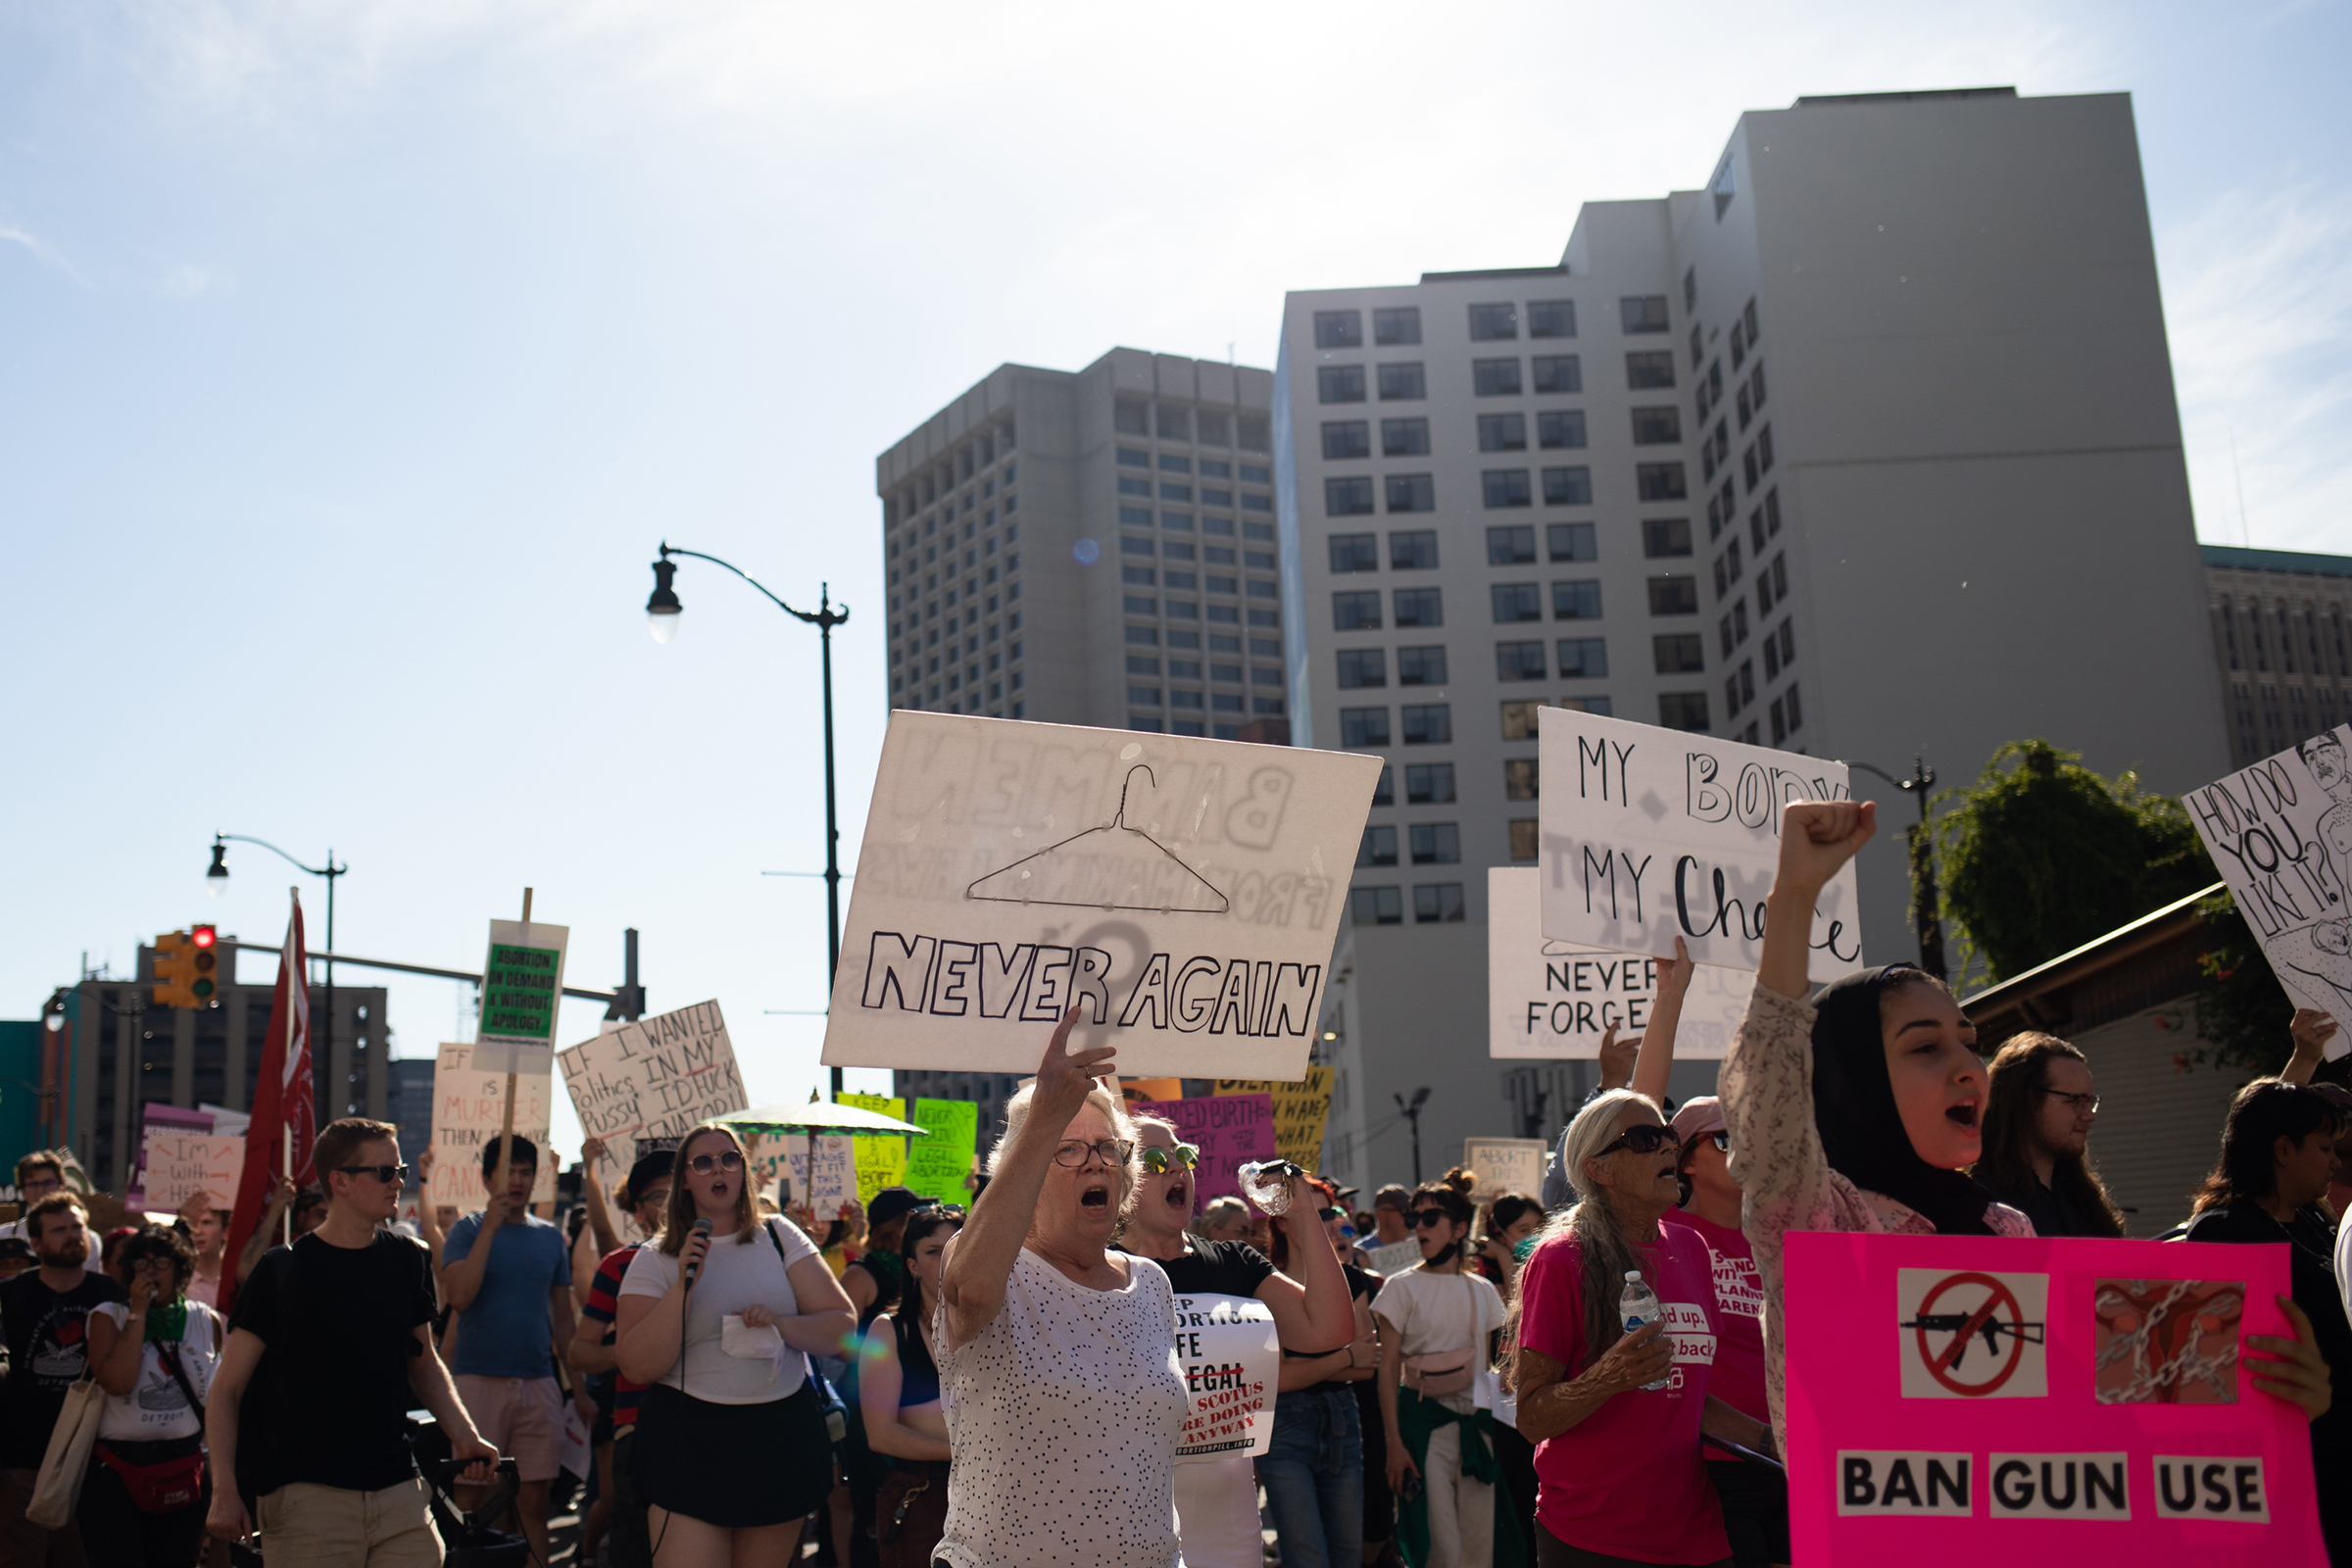 Abortion rights demonstrators march through the streets to protest the Supreme Court's decision in the Dobbs v. Jackson Women's Health case on June 24 in Detroit, Mich. (Emily Elconin—Getty Images)